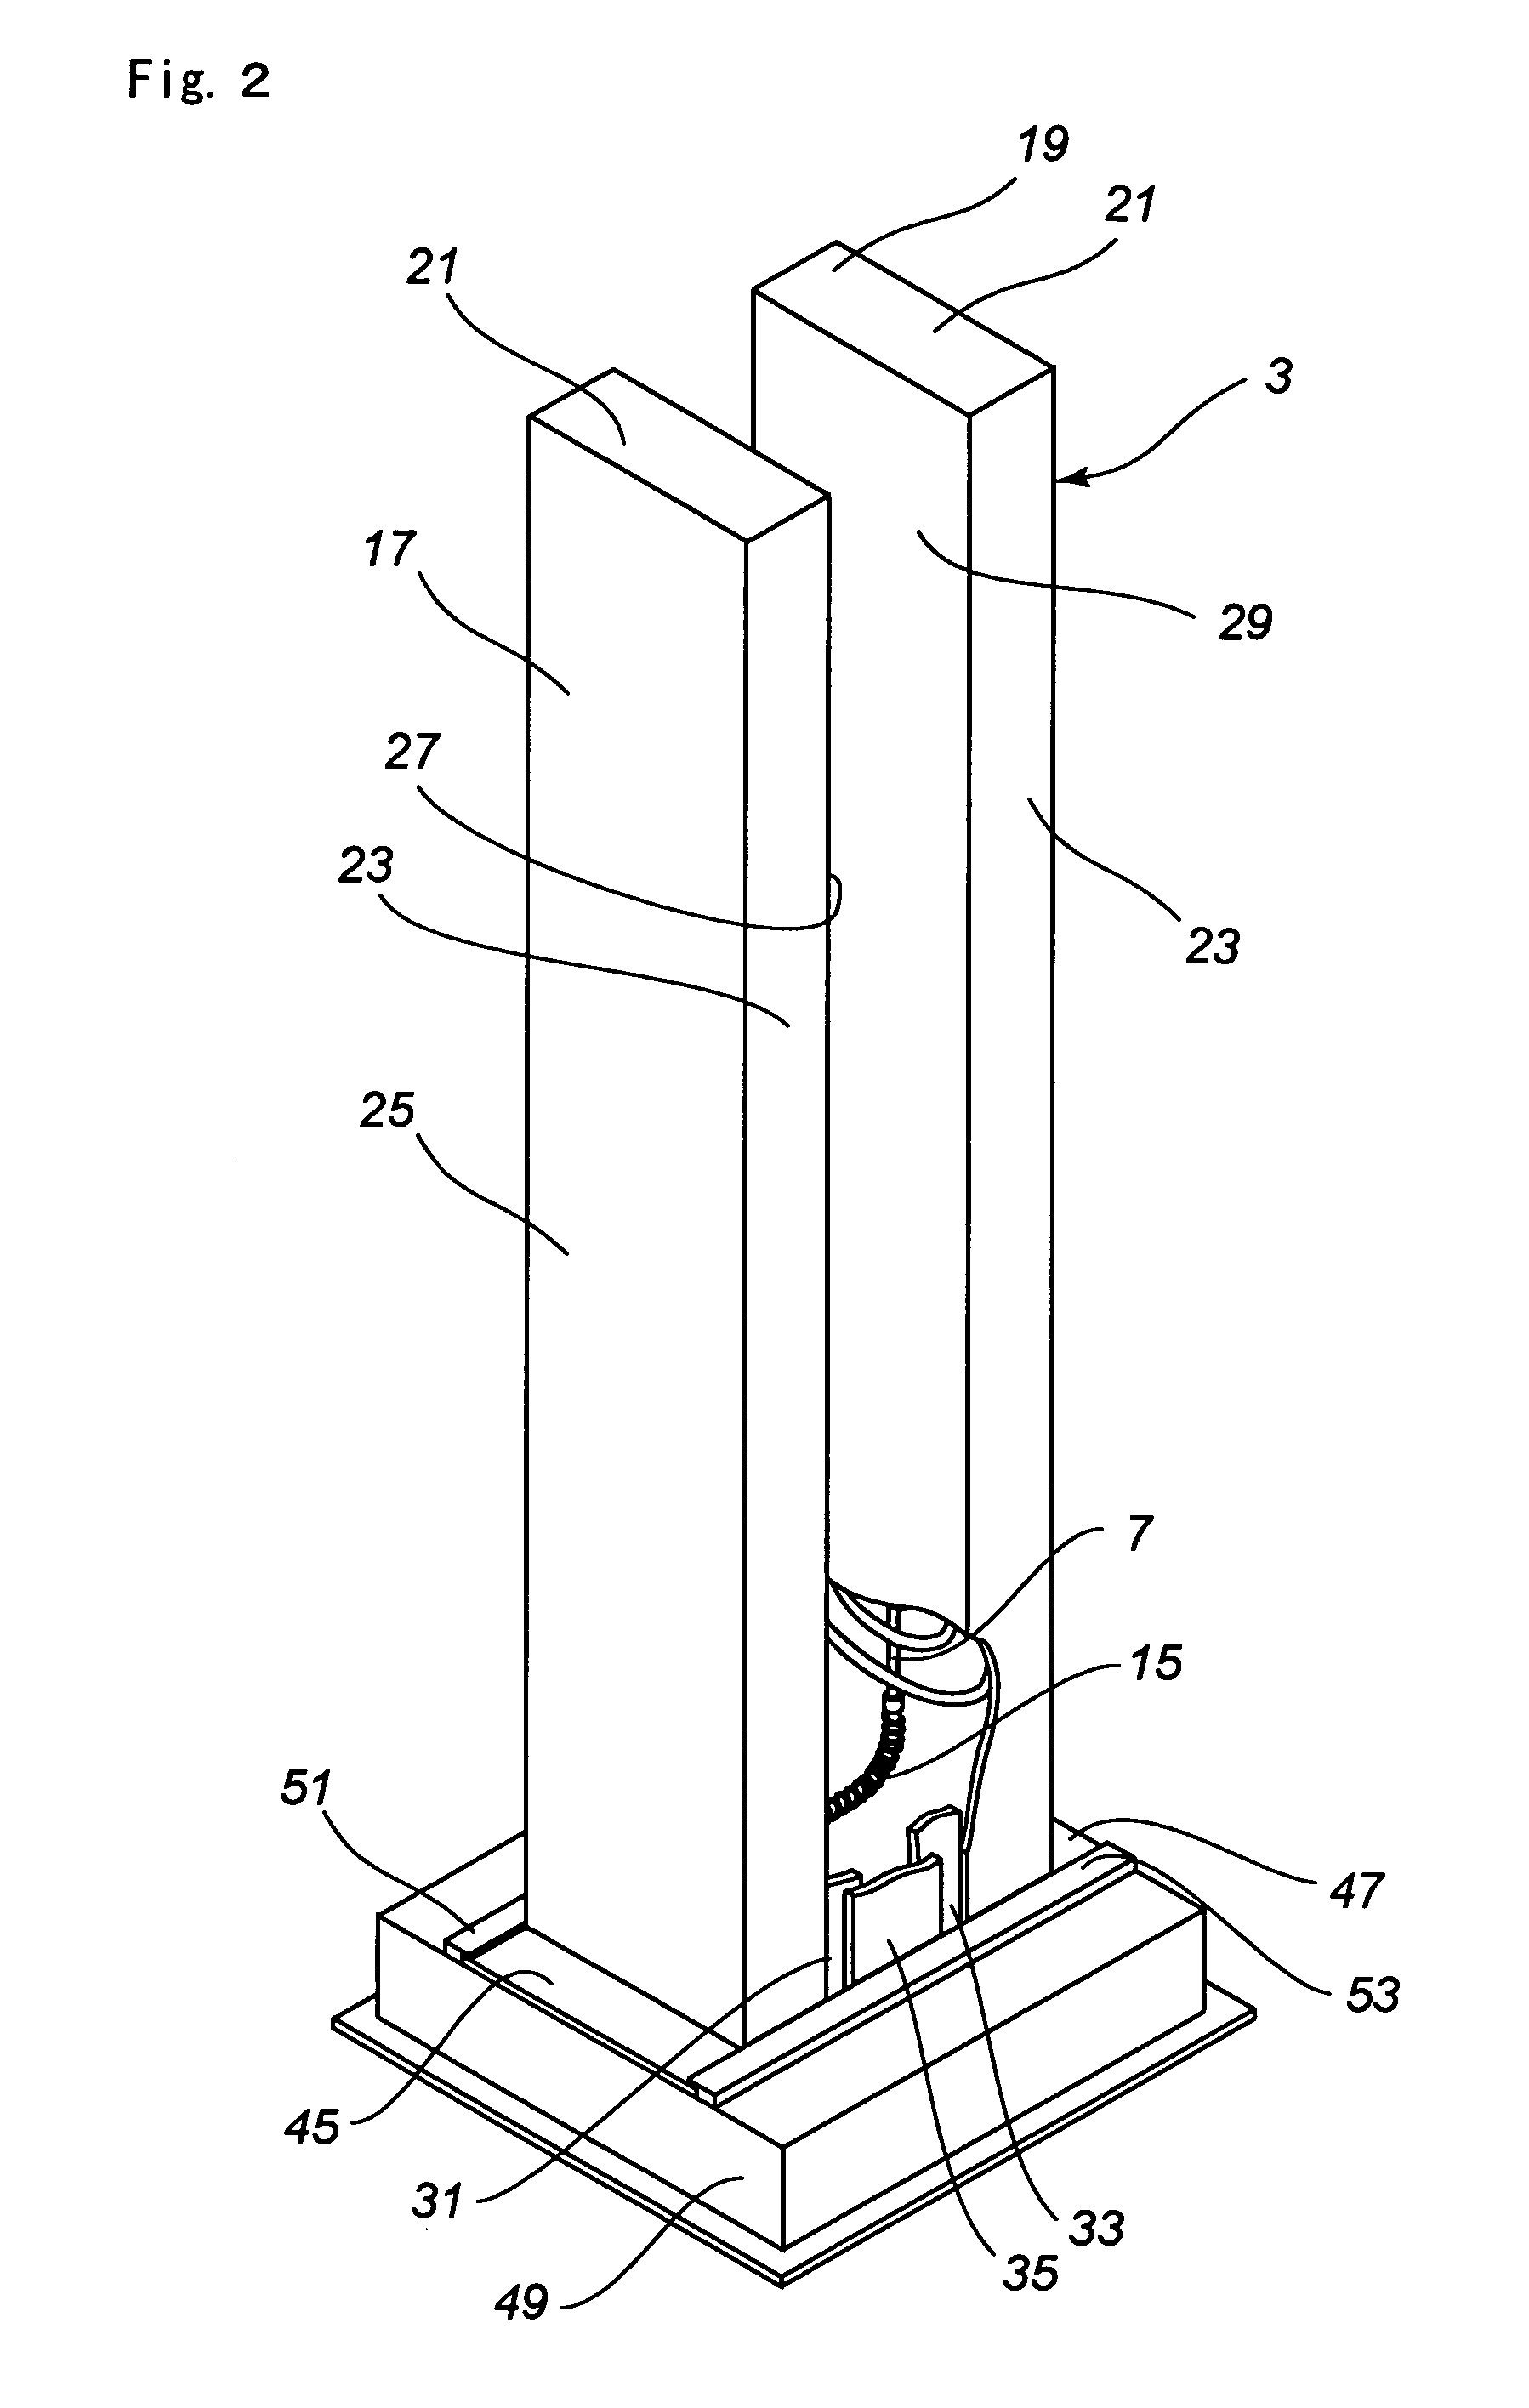 Apparatus and method for heating works uniformly through high frequency induction coils